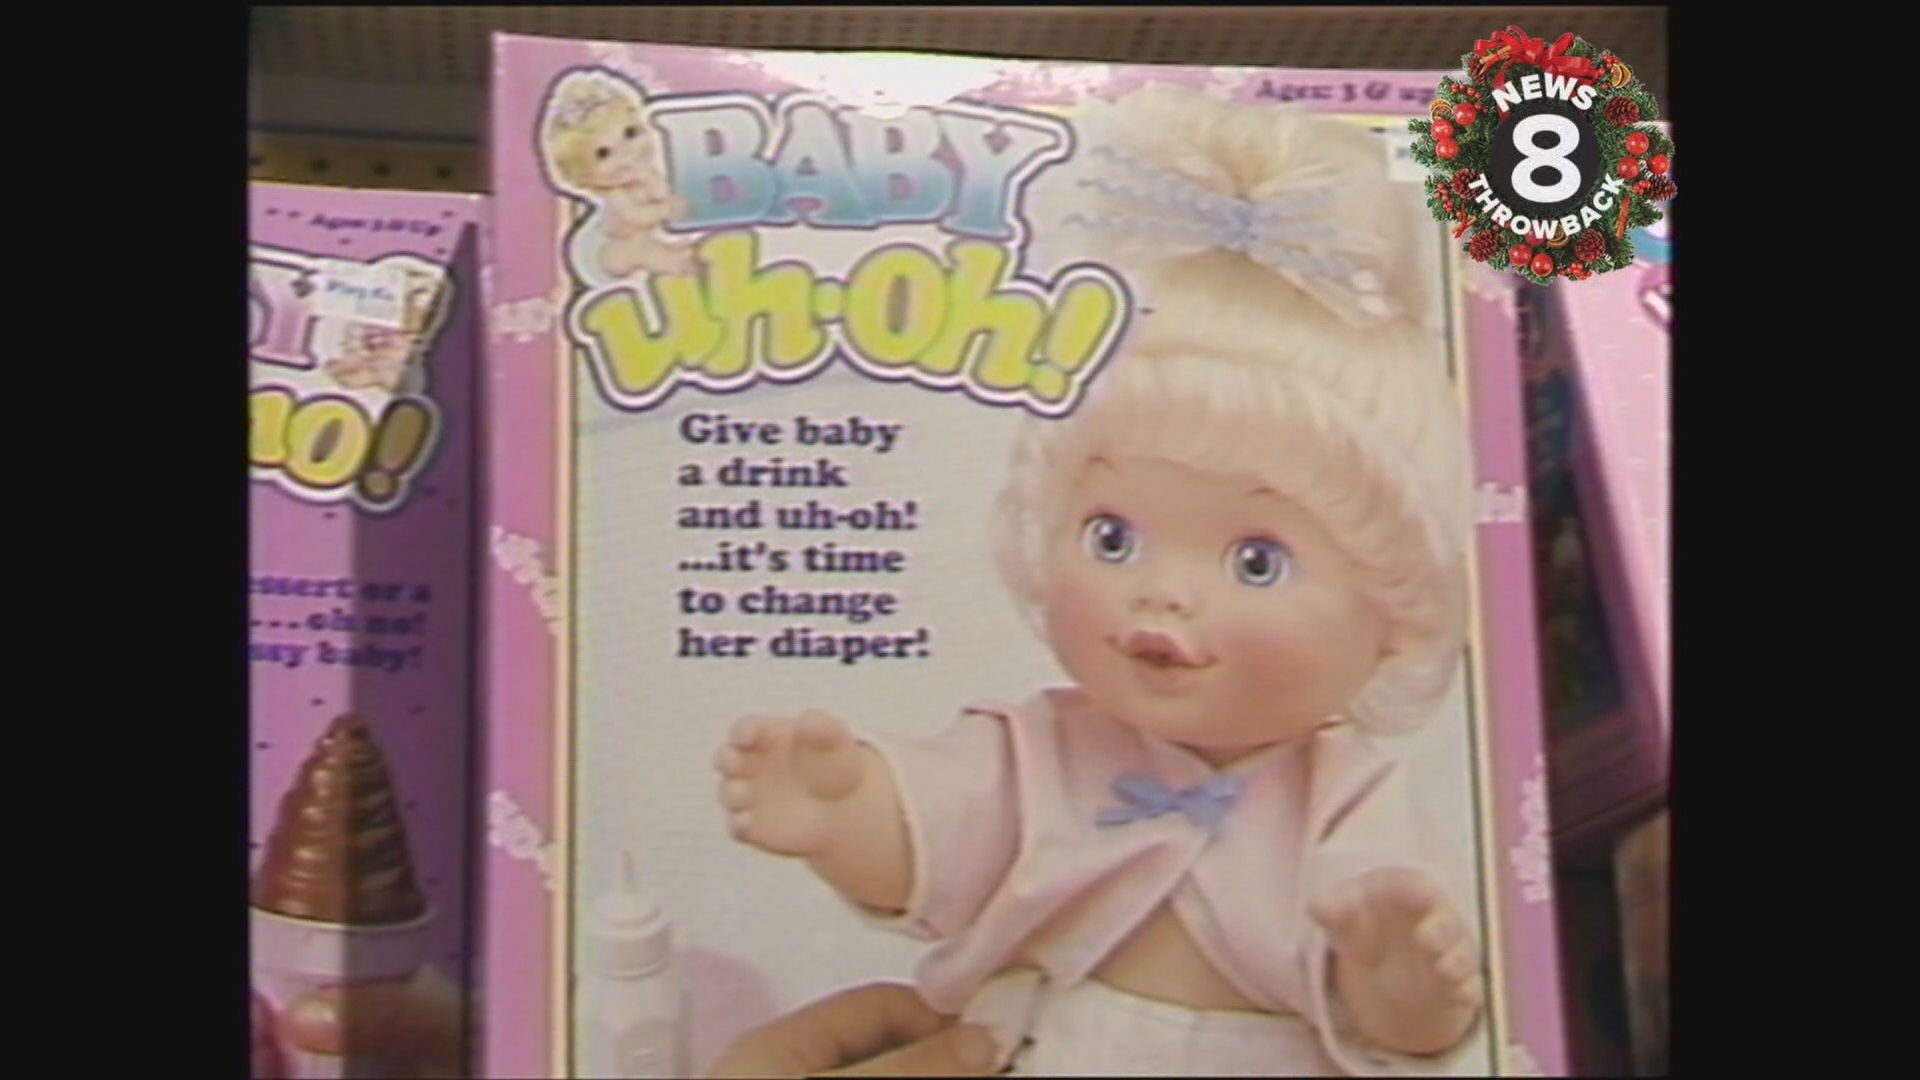 Ahead of Christmas 1991, News 8's Bob Hansen gave San Diego parents a look at the top toys of the season.